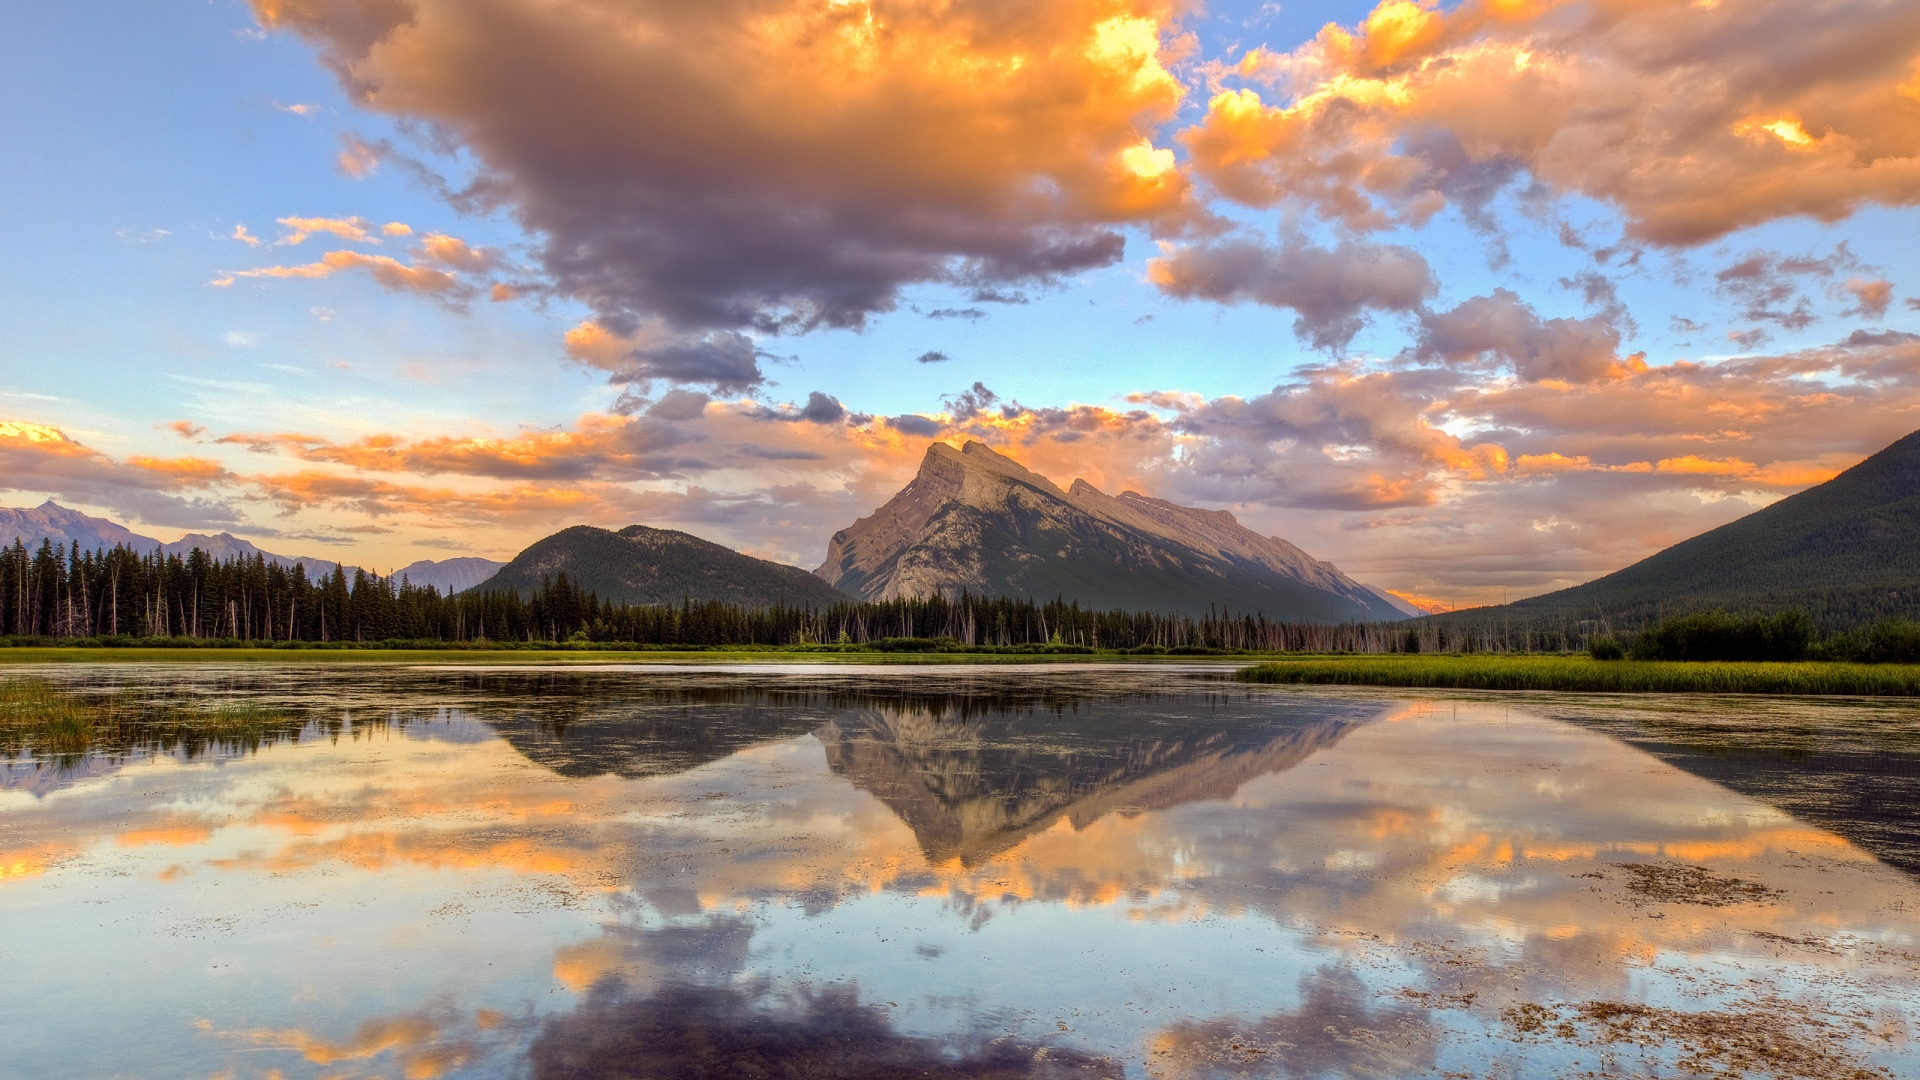 Rundle Mountain for 1920 x 1080 HDTV 1080p resolution